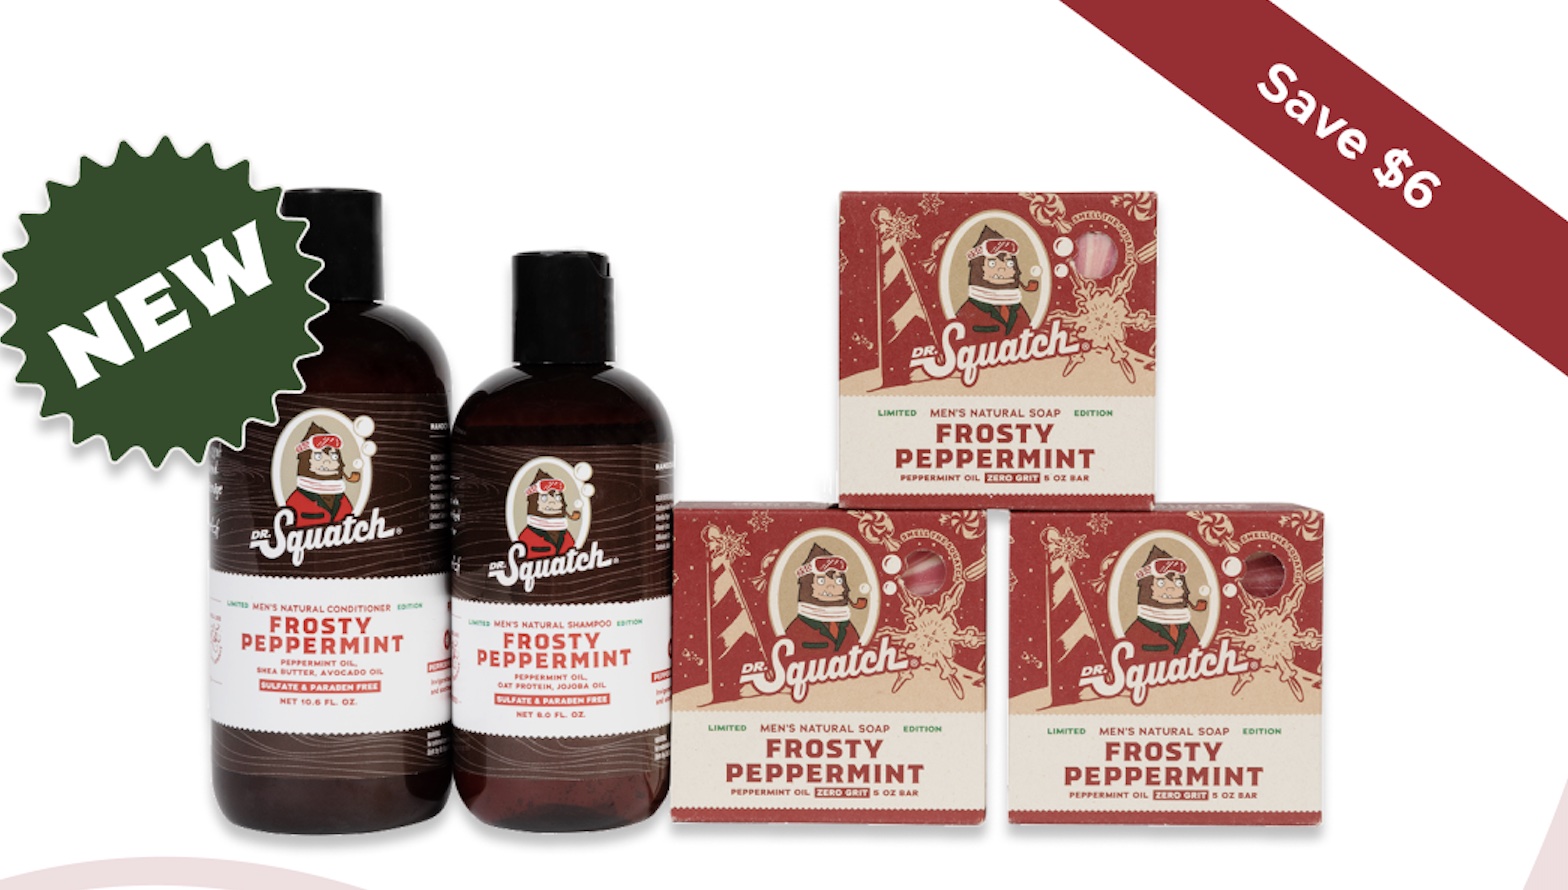 Should You Buy Dr. Squatch's Frosty Peppermint? (Part 2) 